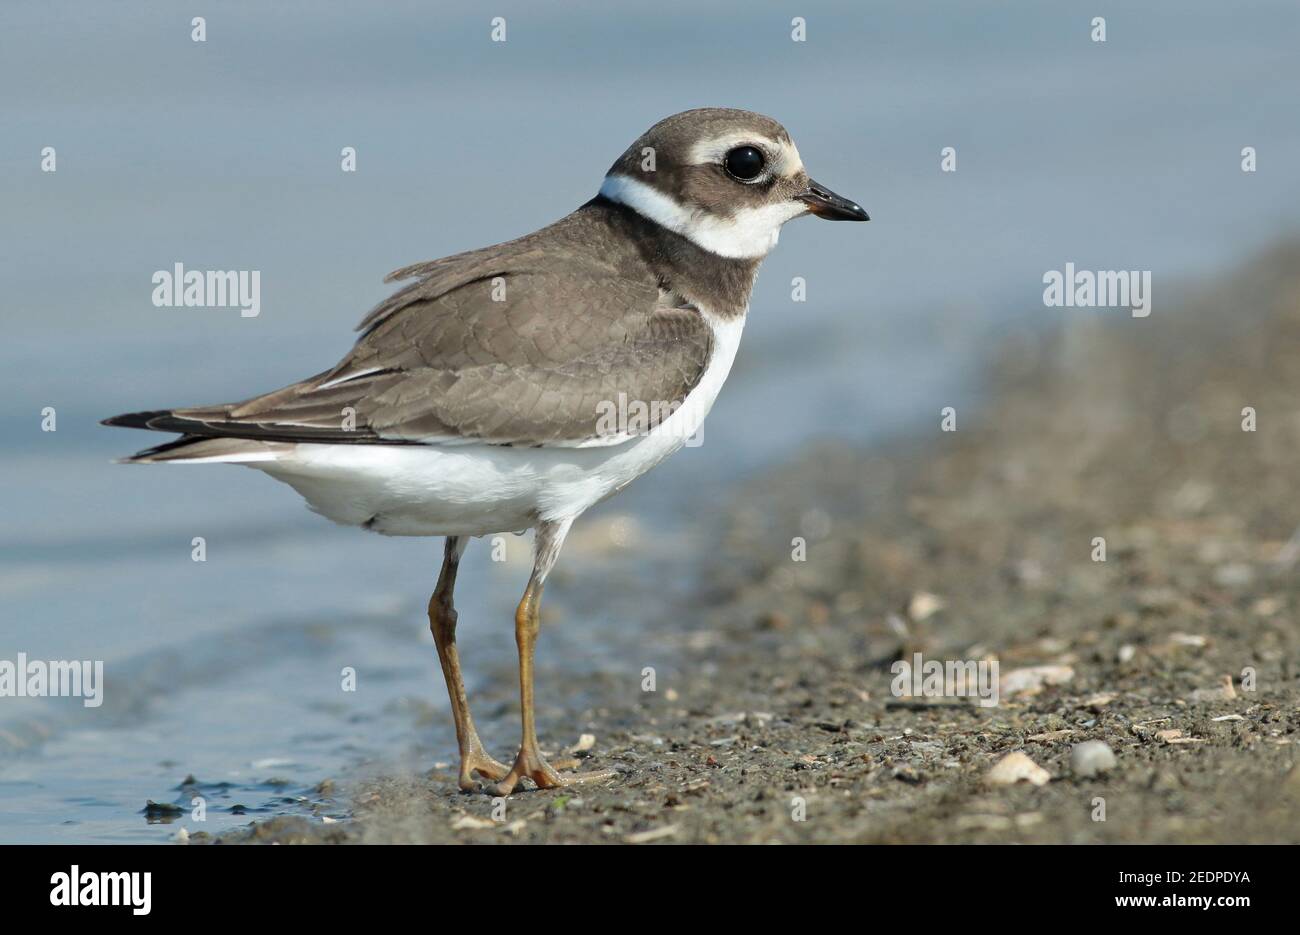 ringed plover (Charadrius hiaticula), Immature standing on a beach, Netherlands Stock Photo